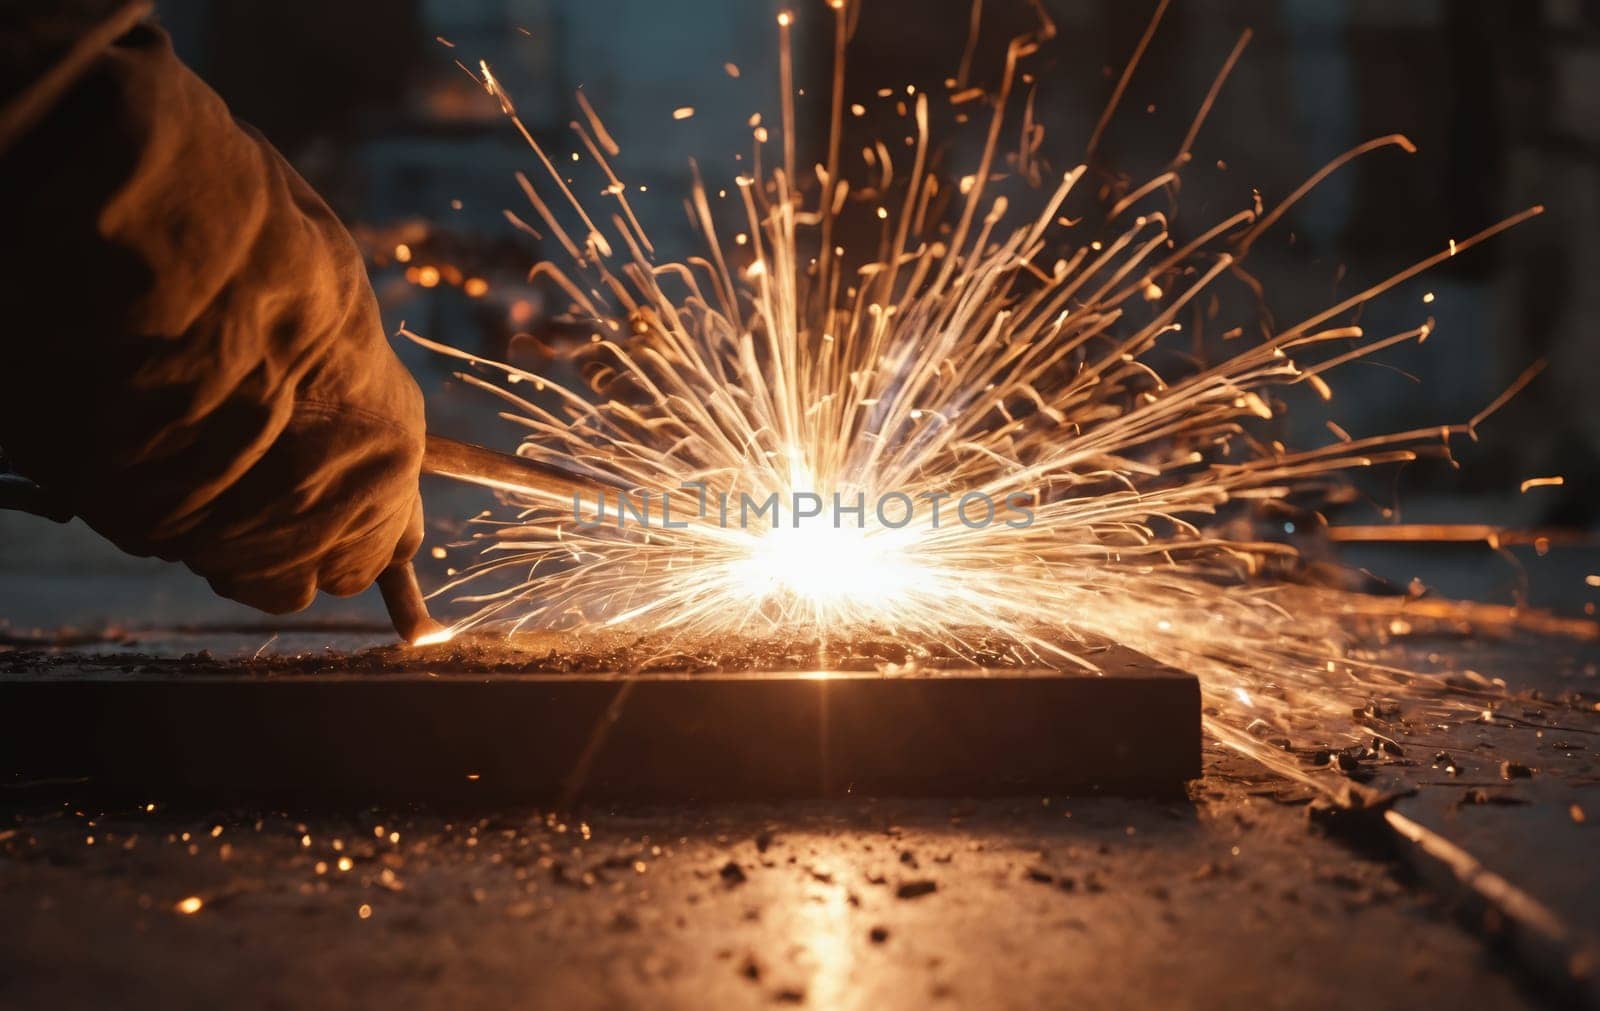 A close up of a person welding metal, creating sparks in the darkness by Andre1ns